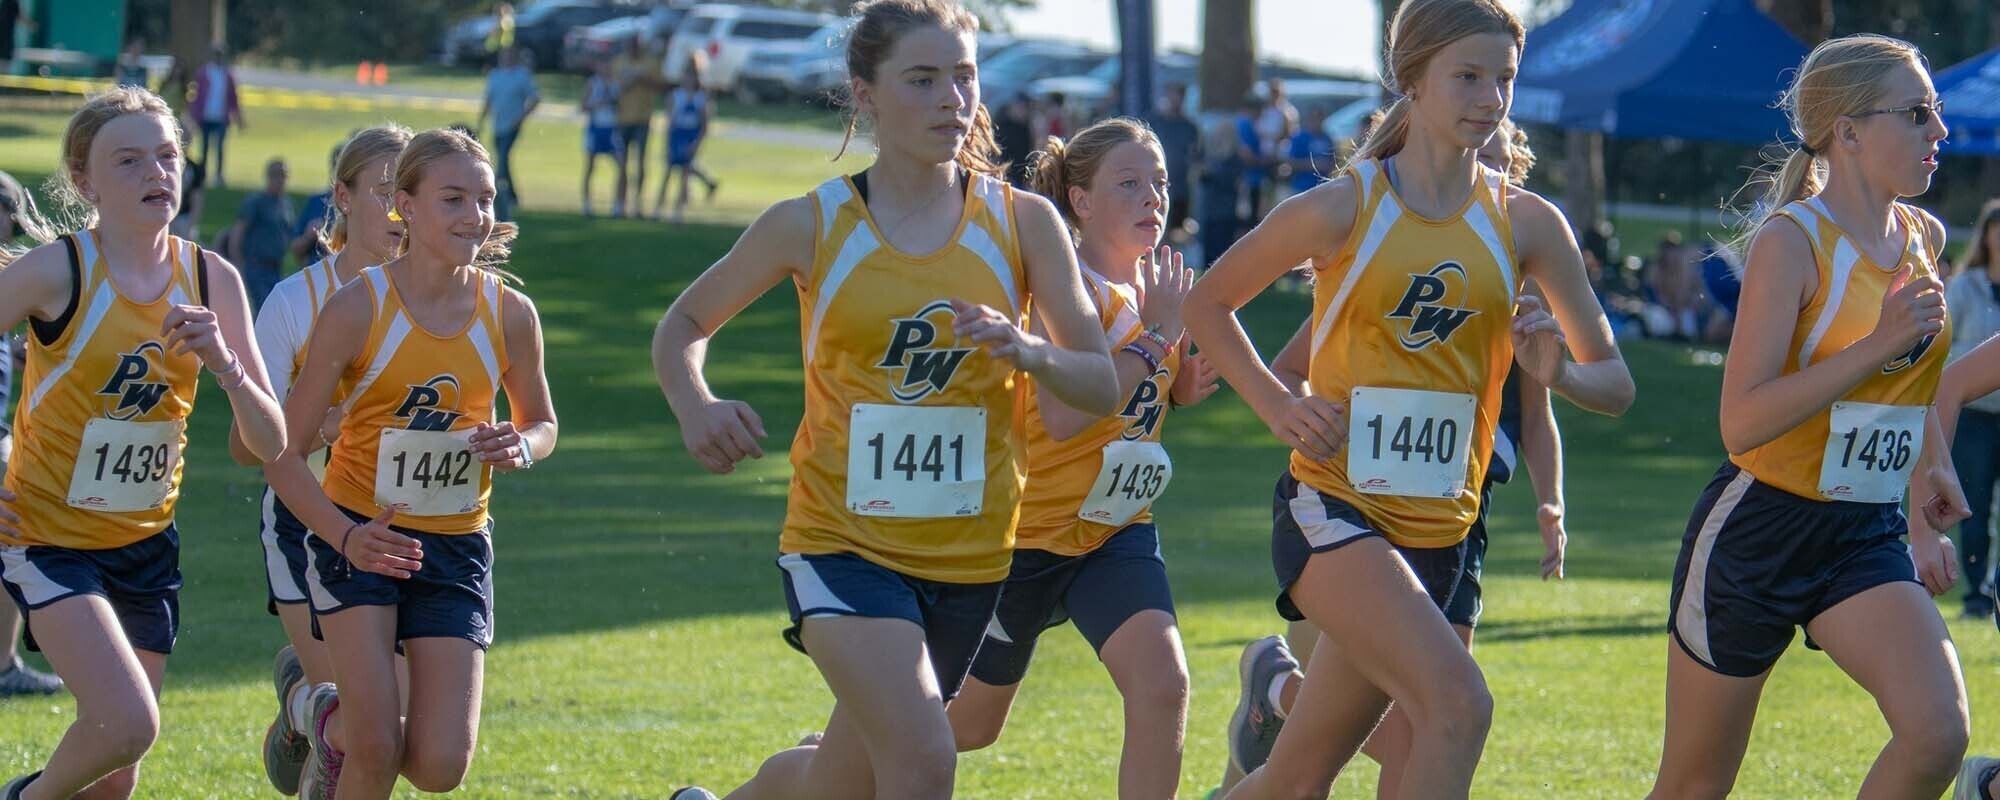 Middle School Cross Country Girls team running